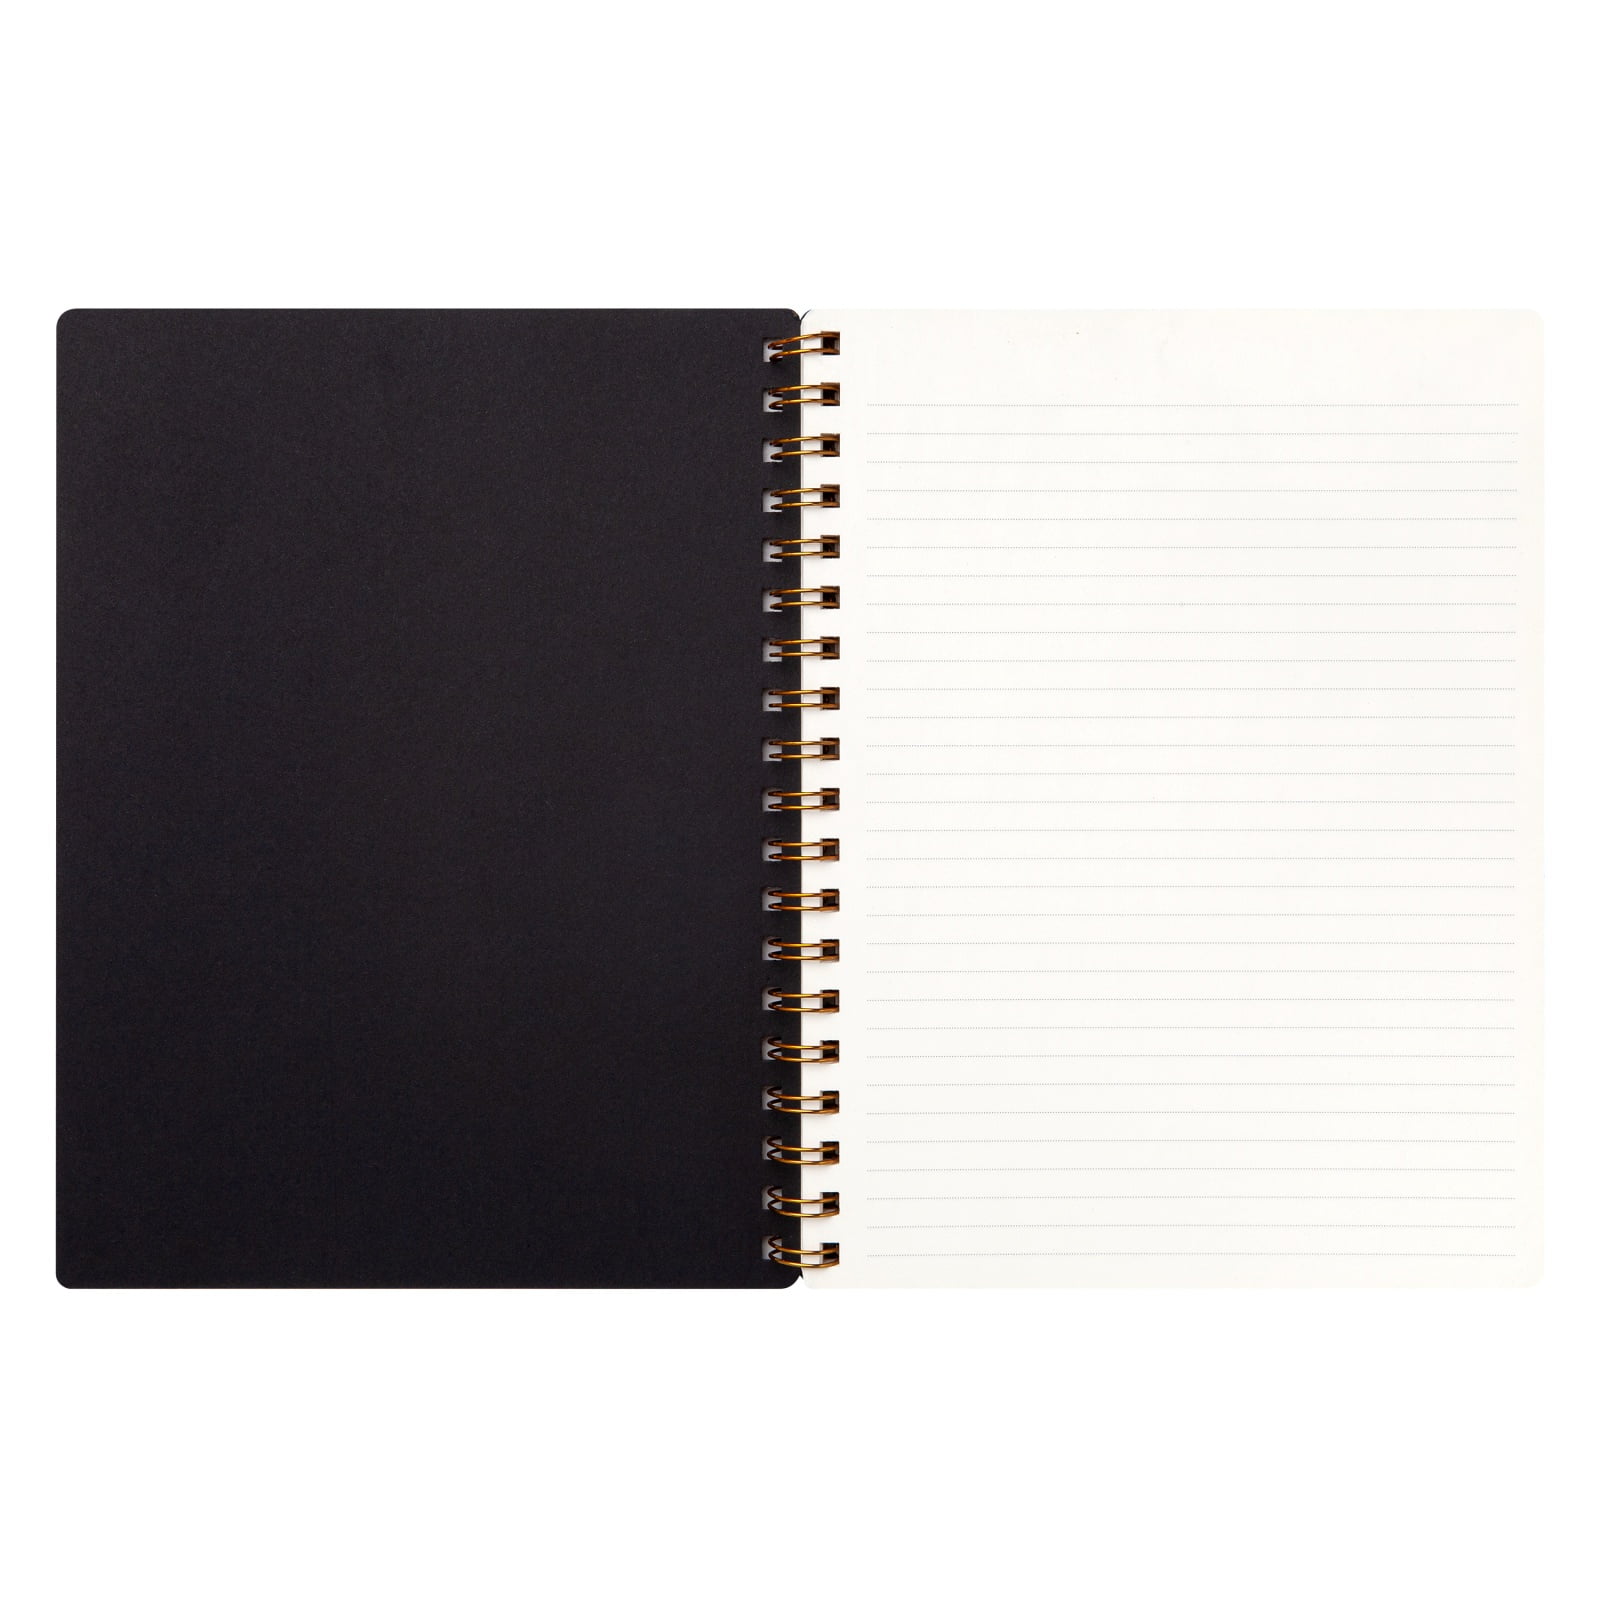 Blank Spiral Notebook, Sturdy High-quality Bullet Journal, Macro